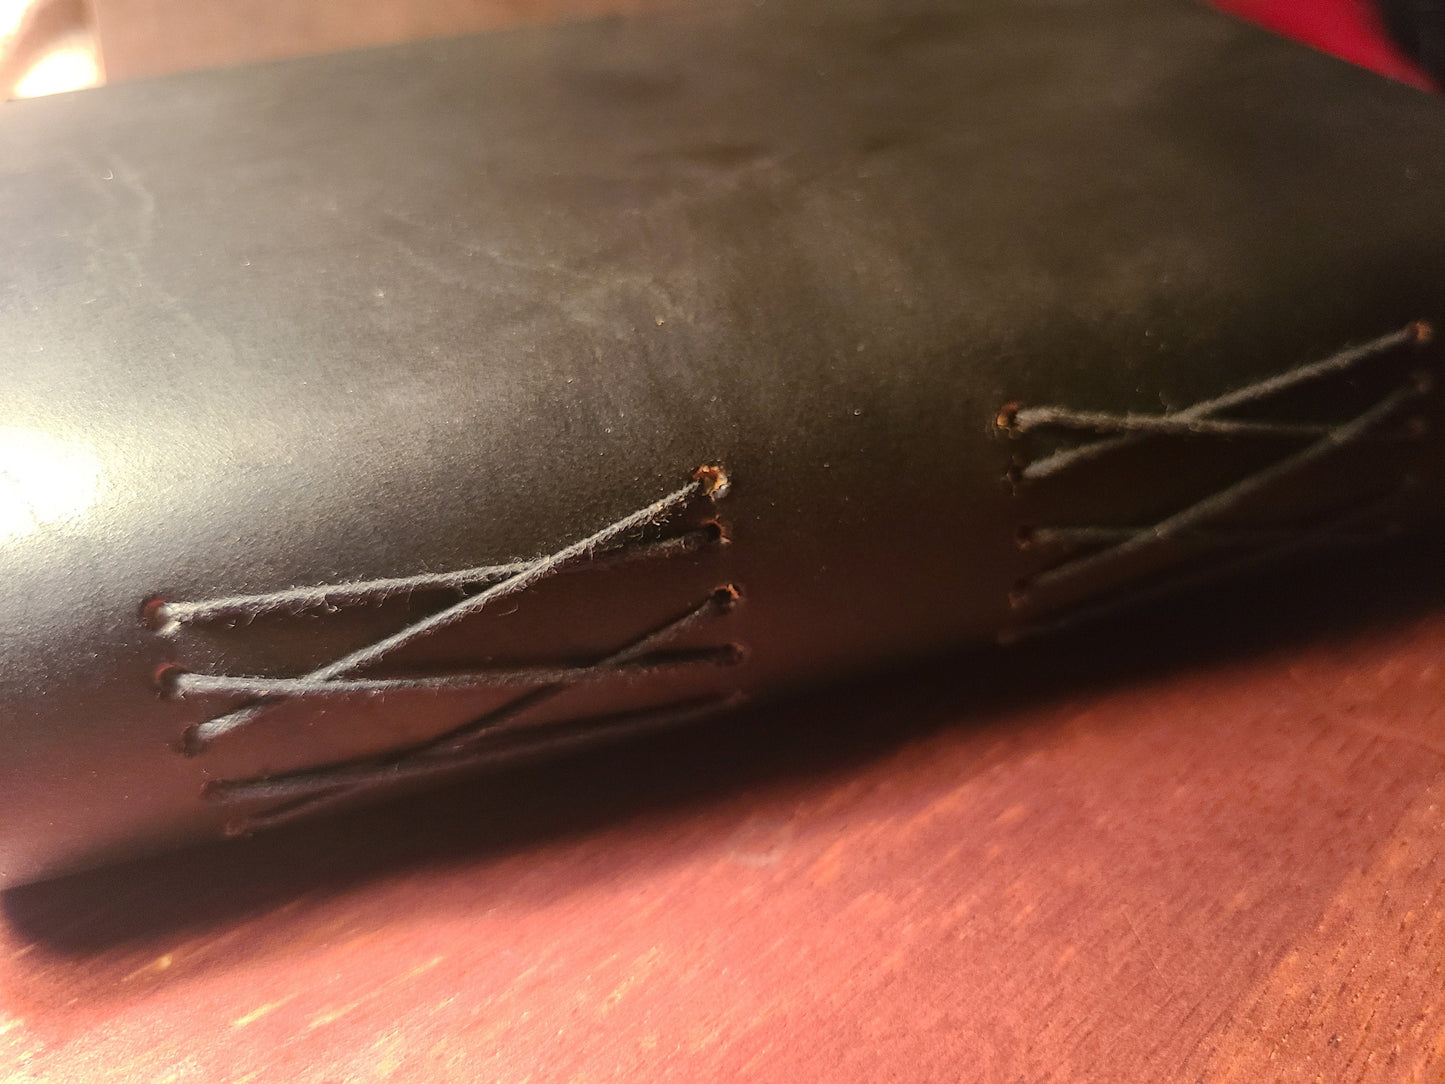 Leather Writing Journal With Leather Strap Closure-Status Co. Leather Studio